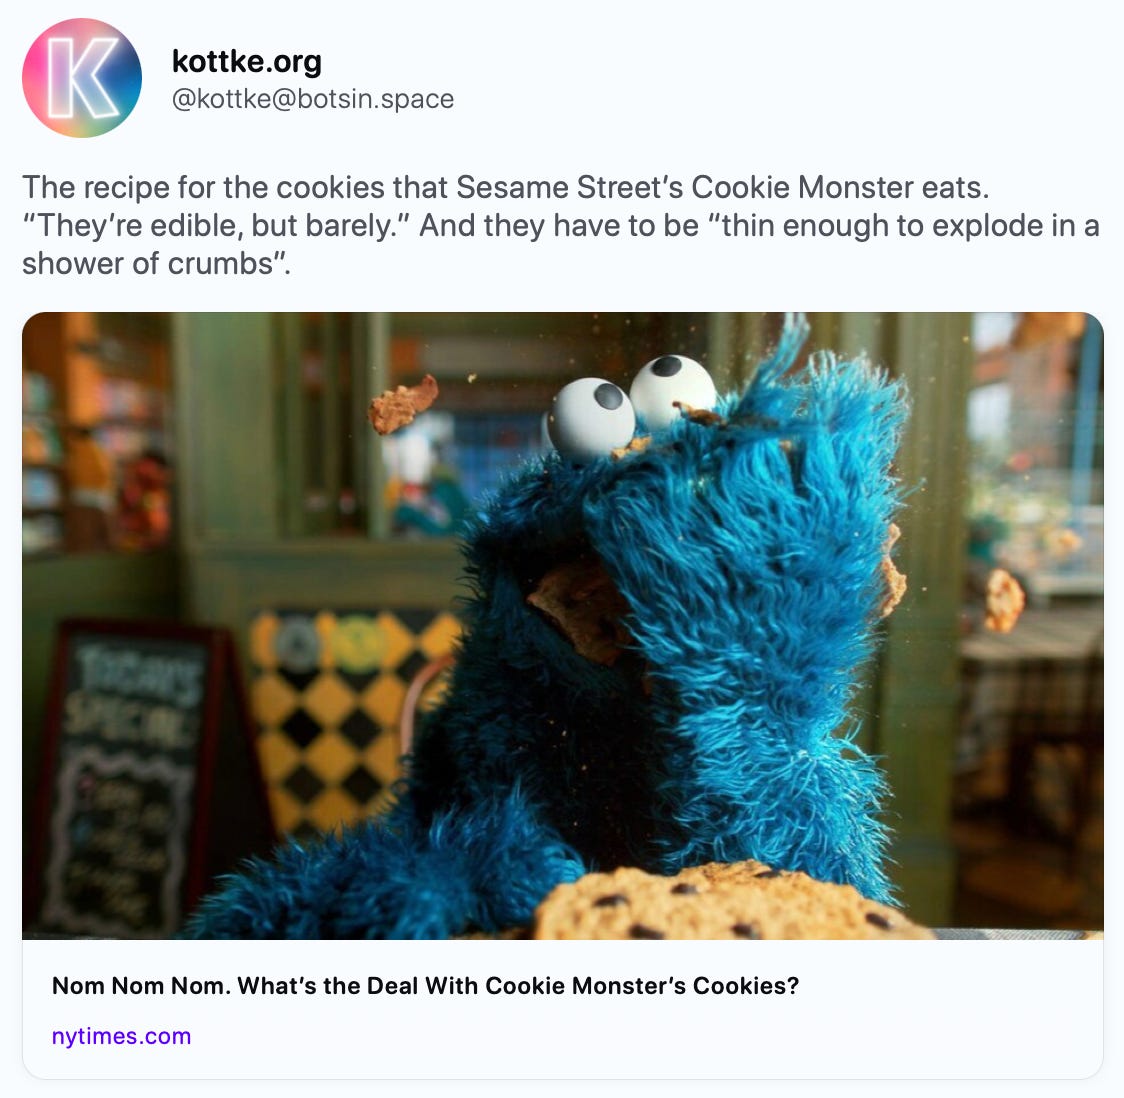 kottke.org @kottke@botsin.space The recipe for the cookies that Sesame Street’s Cookie Monster eats. “They’re edible, but barely.” And they have to be “thin enough to explode in a shower of crumbs”. https://www.nytimes.com/2023/11/27/arts/te